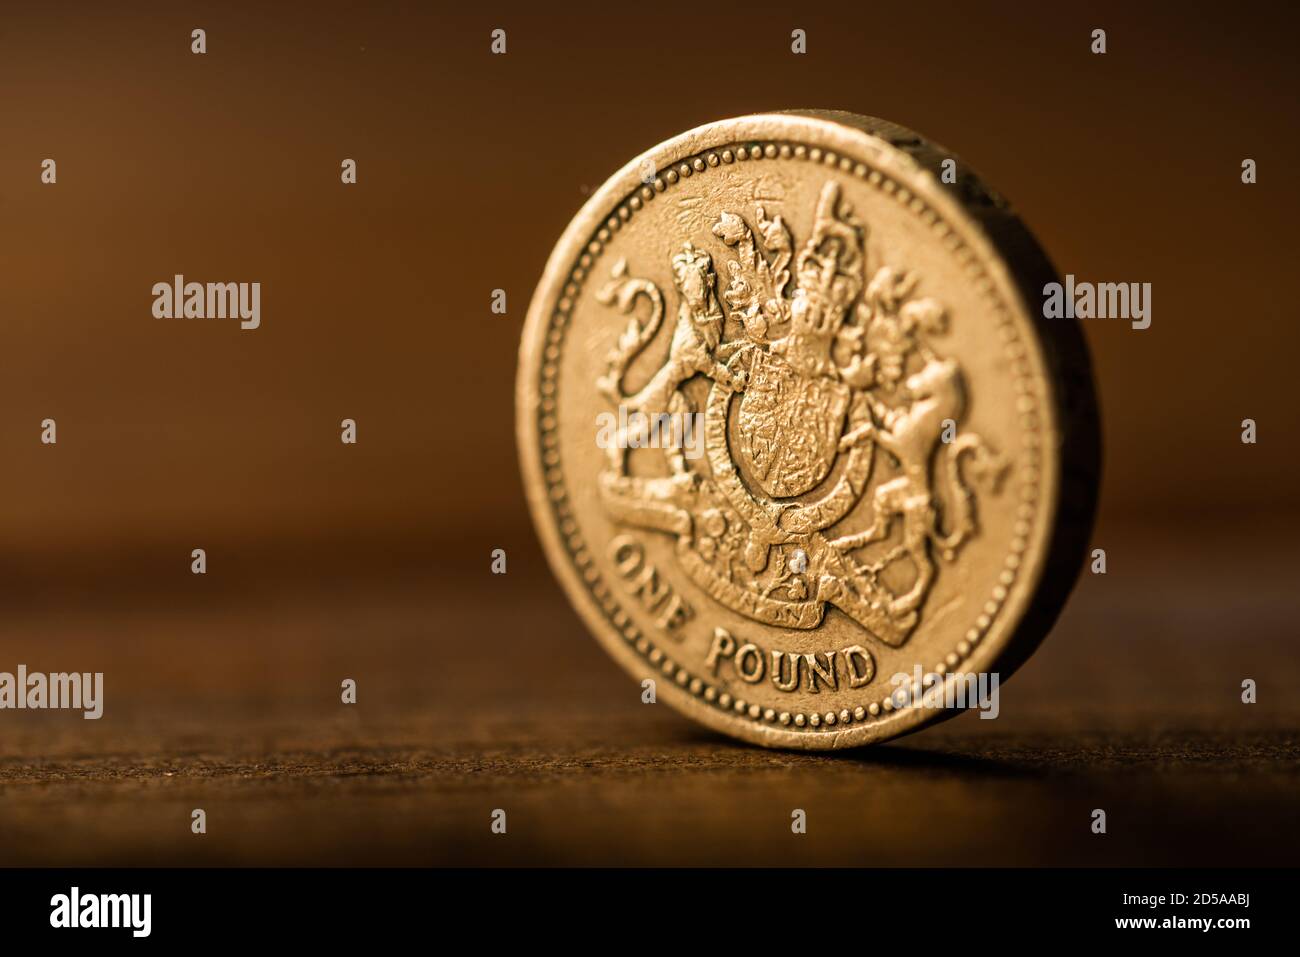 pound GBP coin on the desk Stock Photo